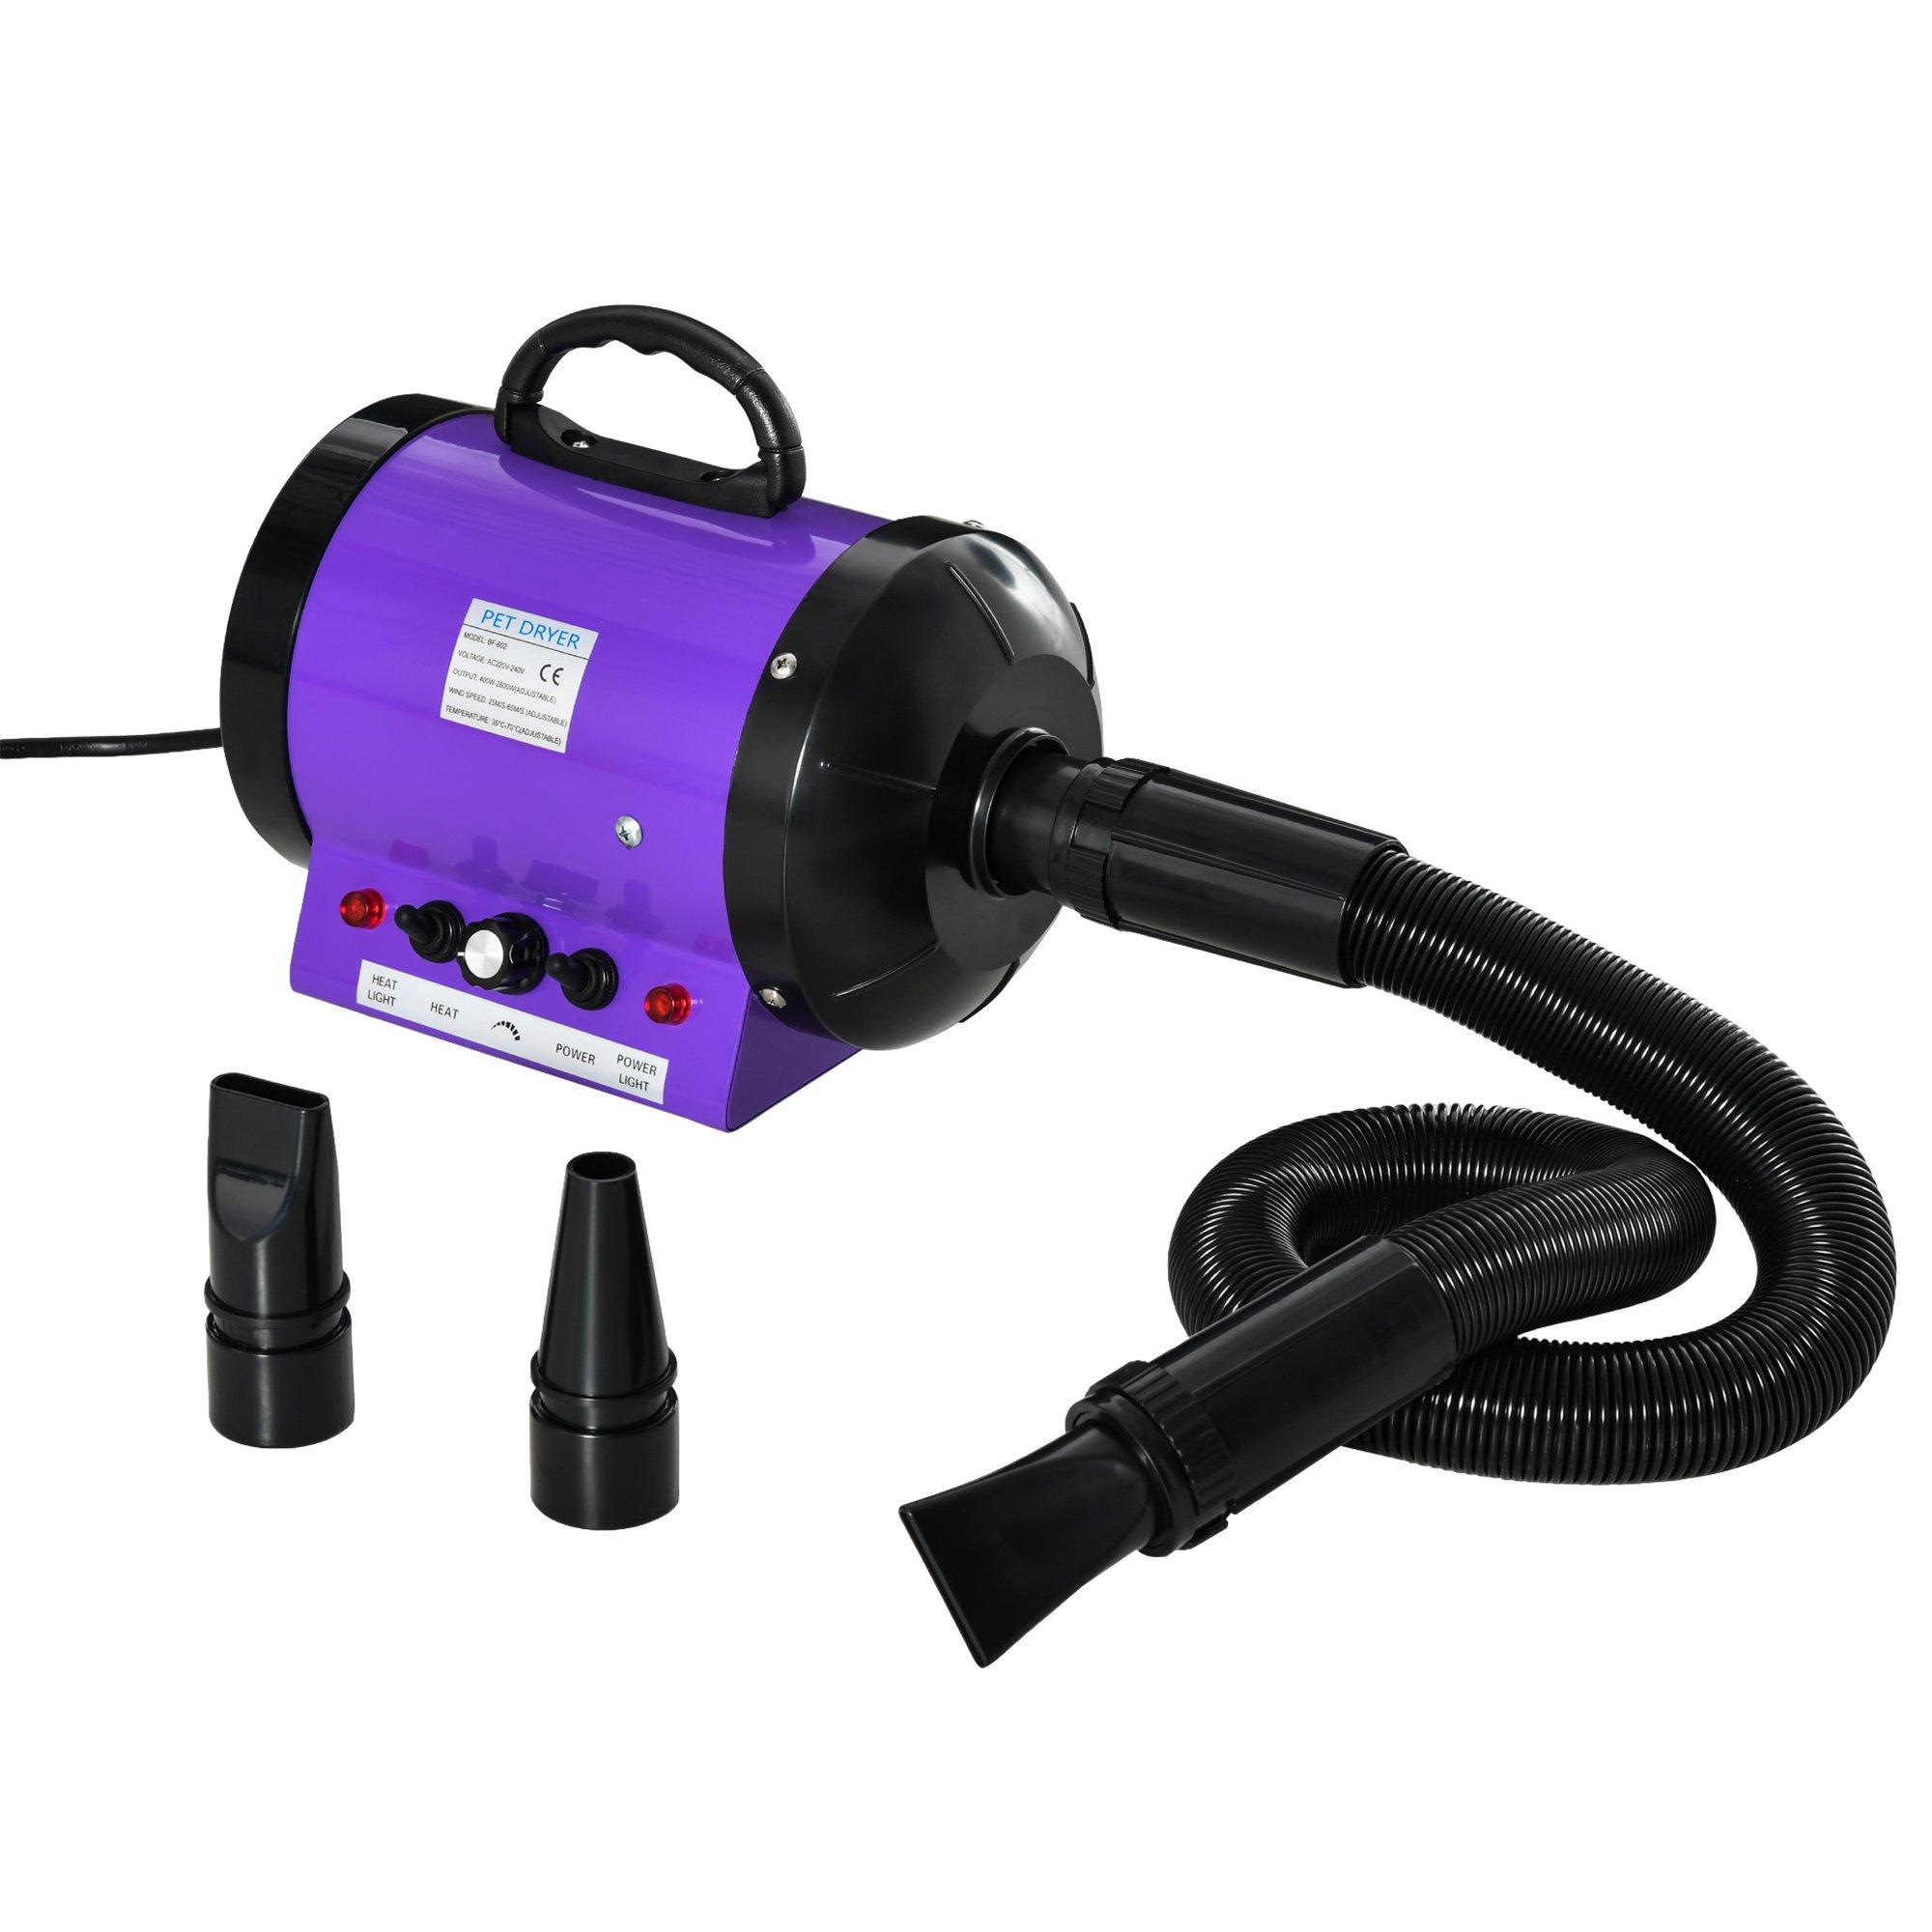 2800W Dog Hair Dryer Pet Grooming Blaster Water Blower Dryer with Three Nozzles